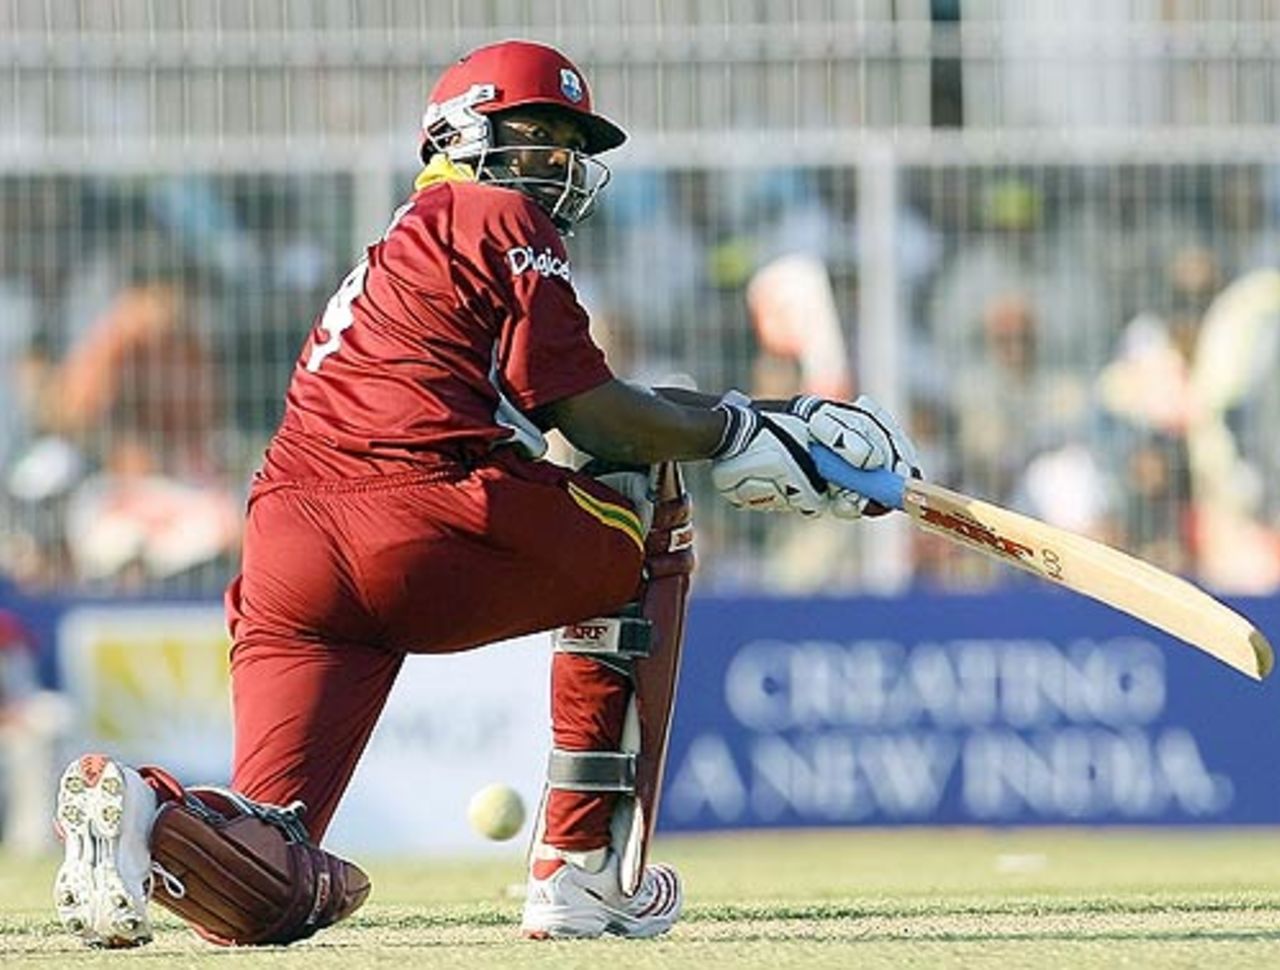 Brian Lara scored 31 off 23 balls and added 66 with Shivnarine Chanderpaul , India v West Indies, 1st ODI, Nagpur, January 21, 2007